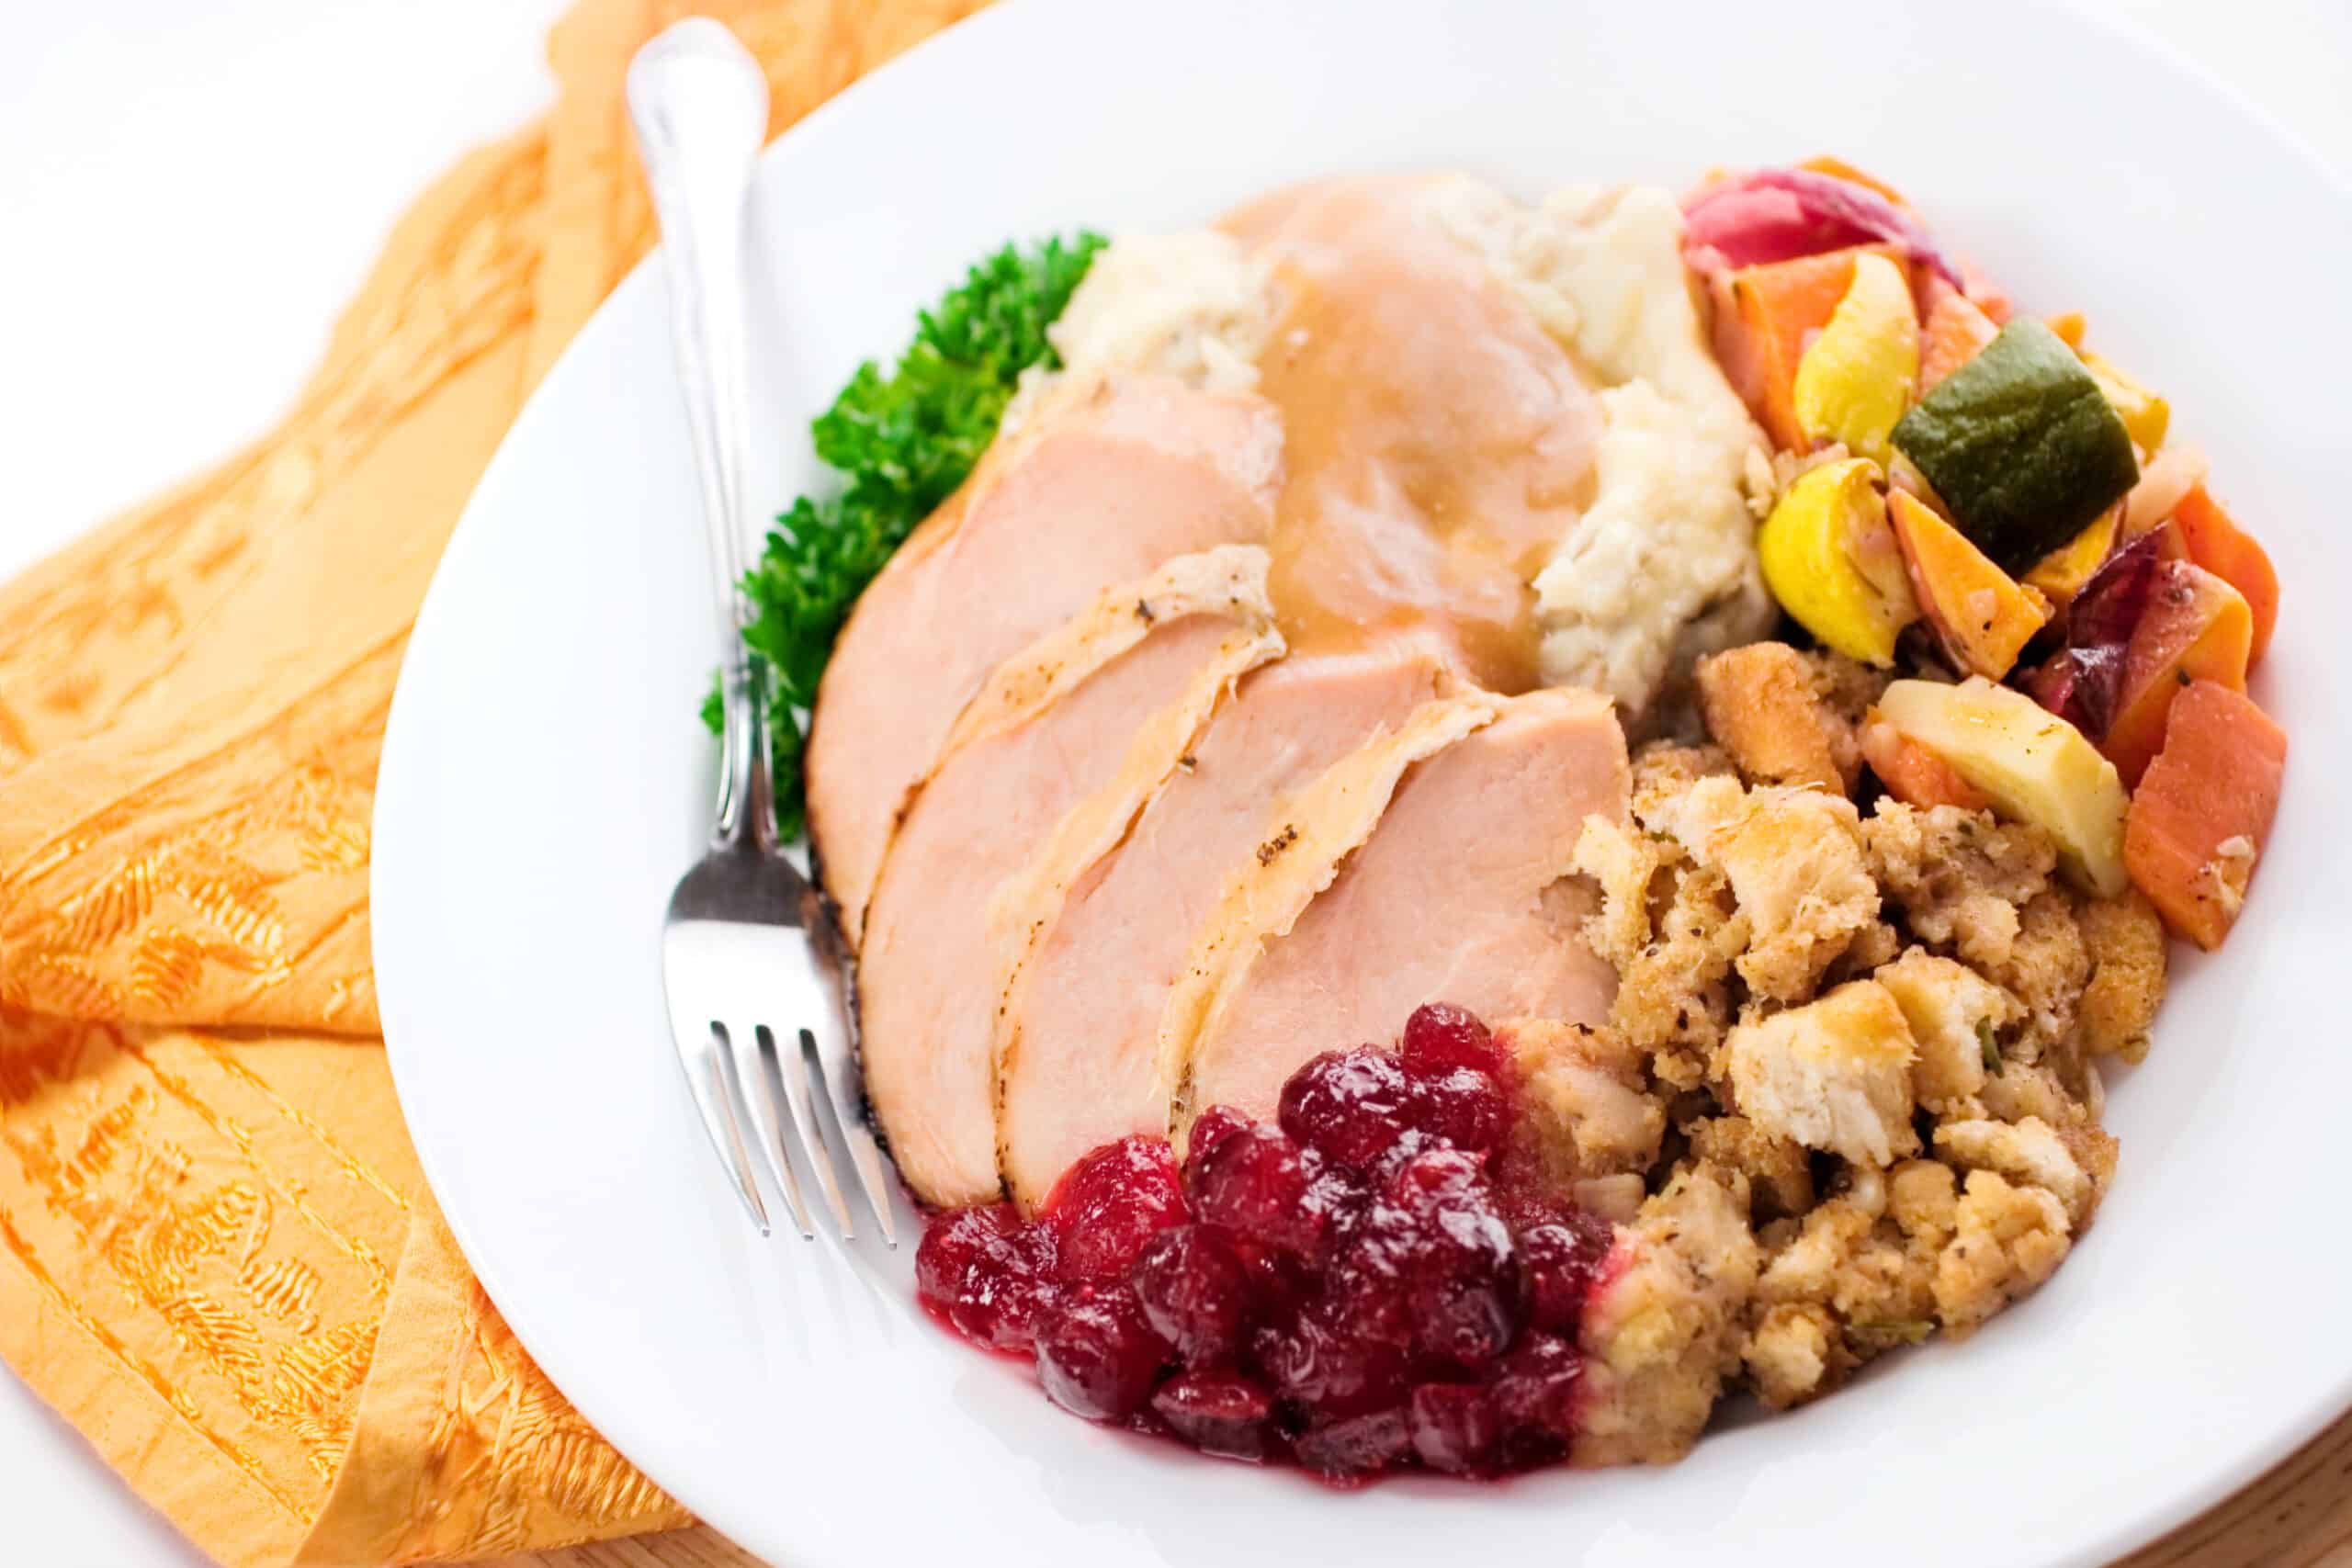 A plate heaped with a plentiful helping of a traditional turkey dinner with cranberries, stuffing, roasted vegetables, mashed potatoes and gravy. Shallow dof.